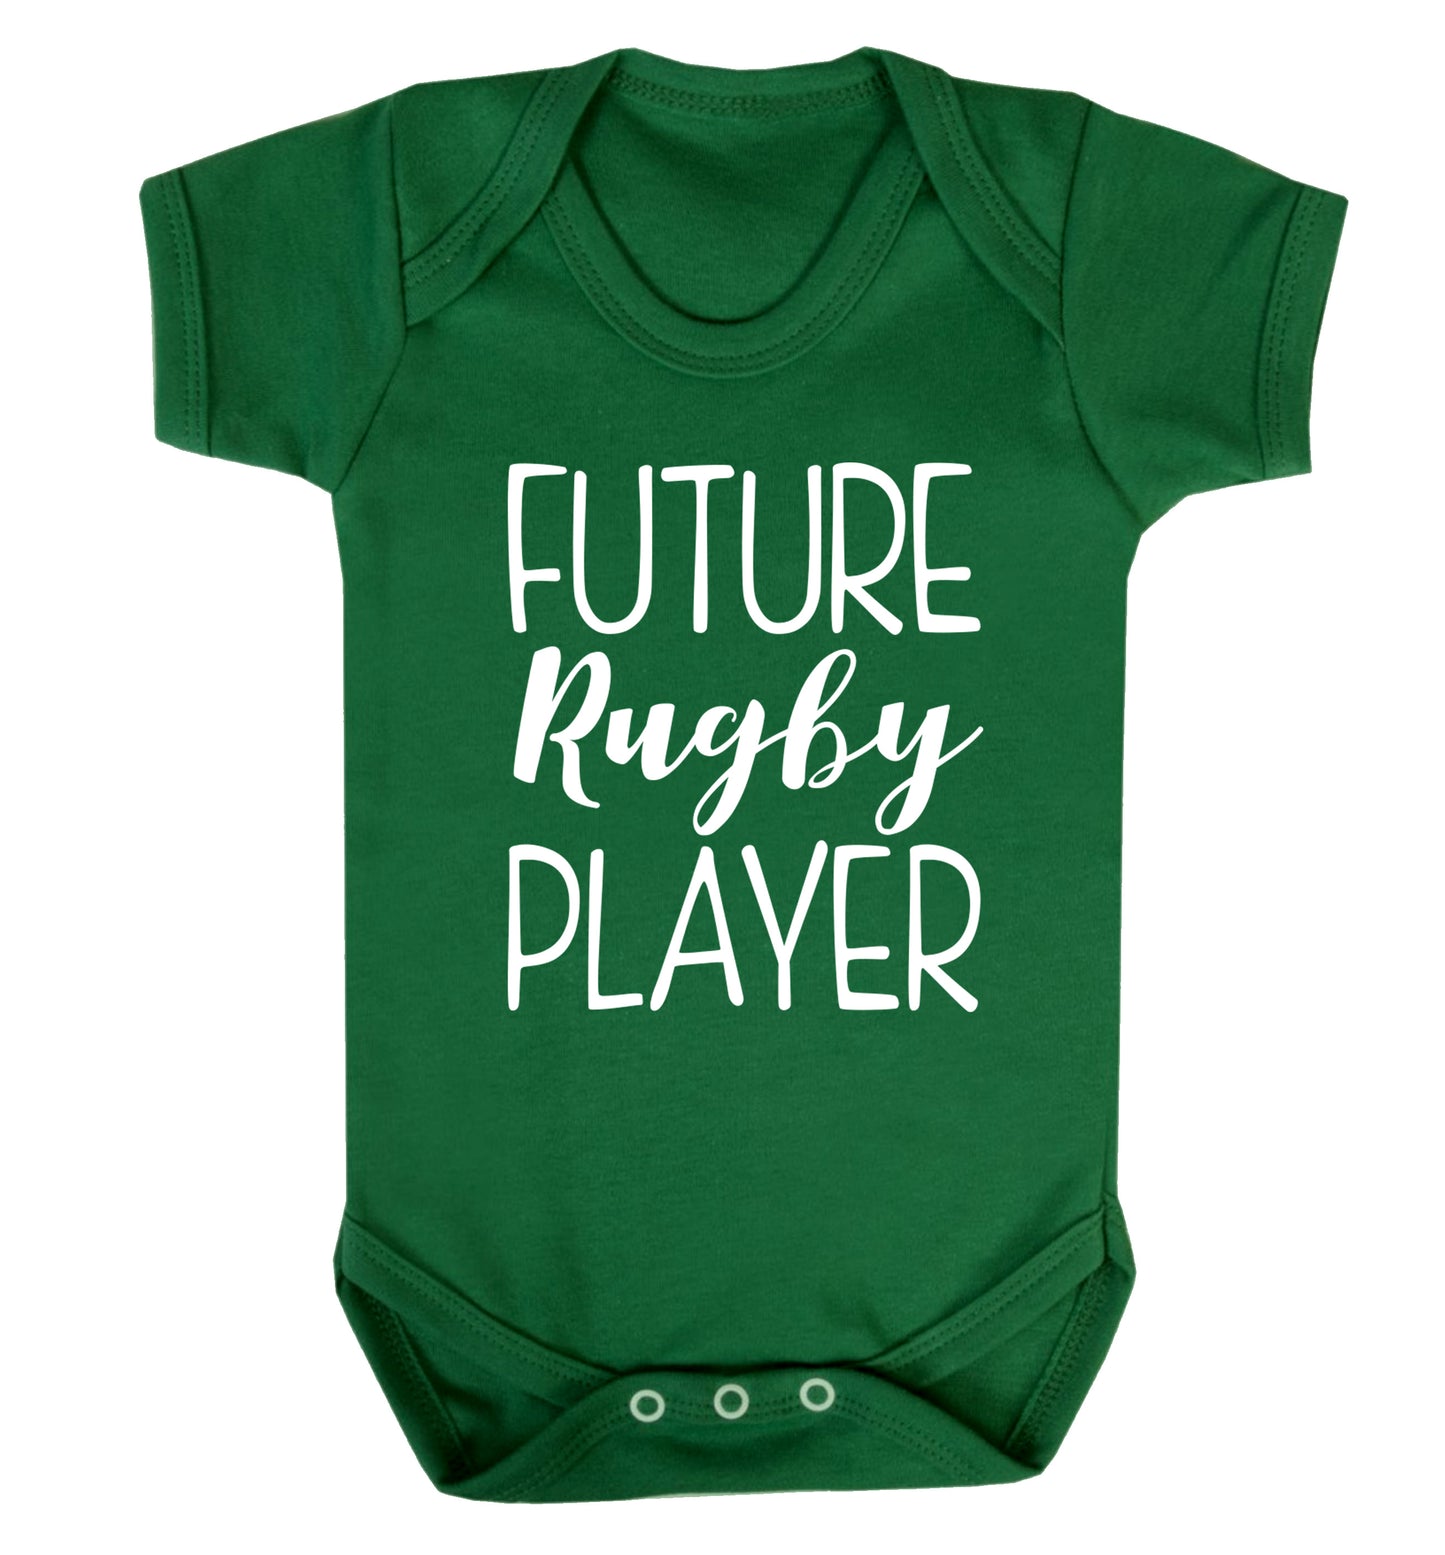 Future rugby player Baby Vest green 18-24 months